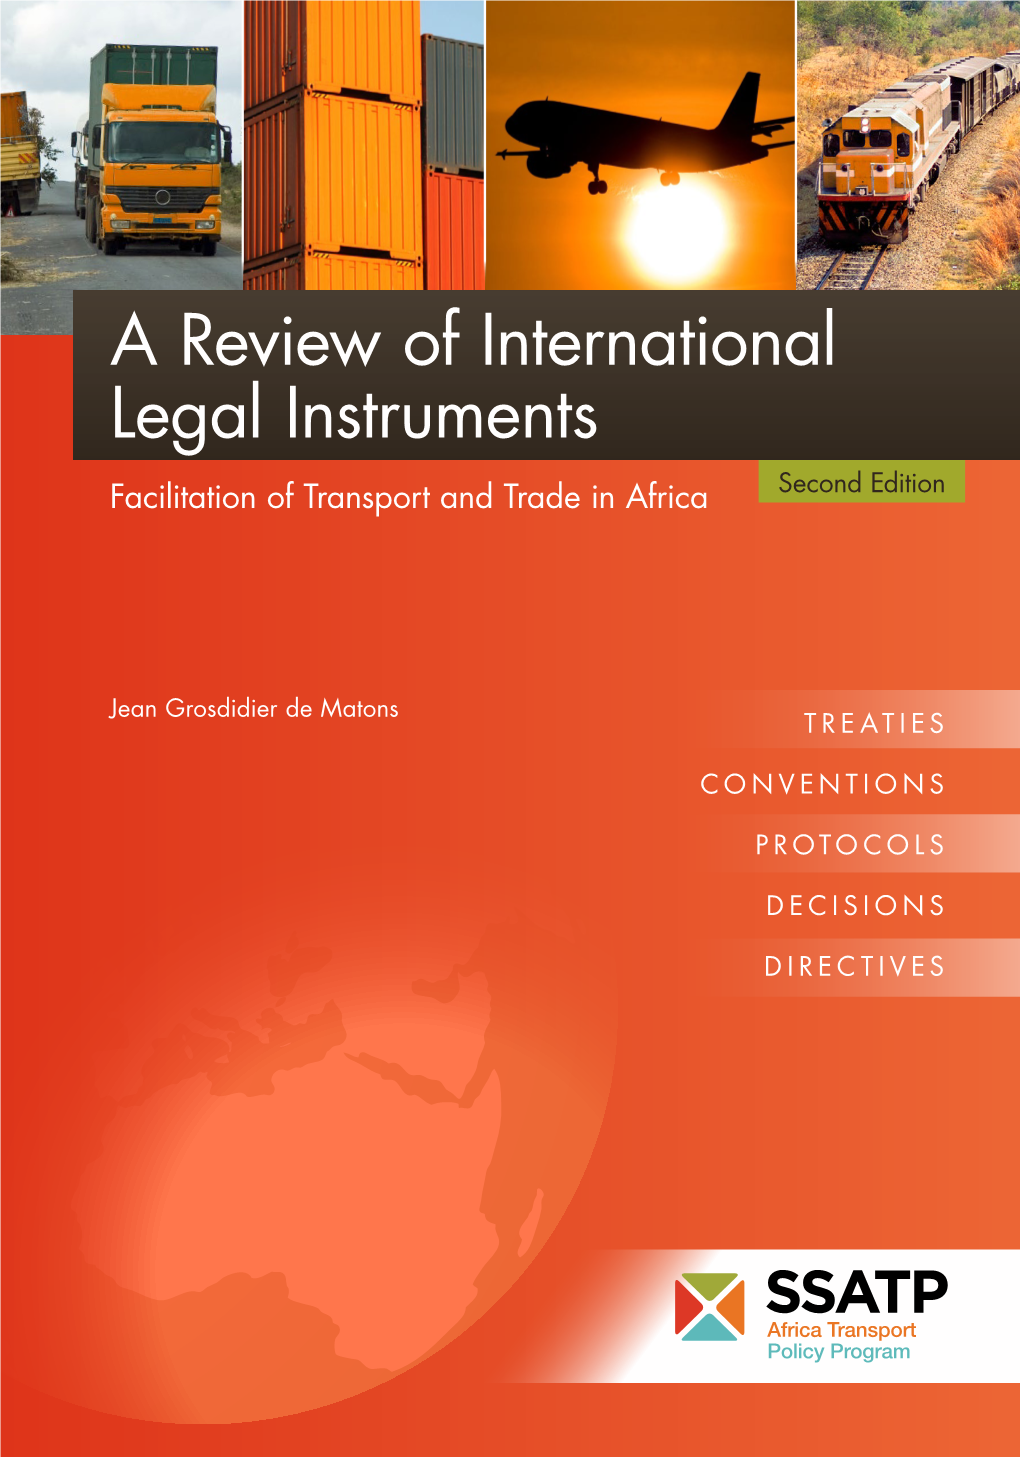 A Review of International Legal Instruments Facilitation of Transport and Trade in Africa Second Edition